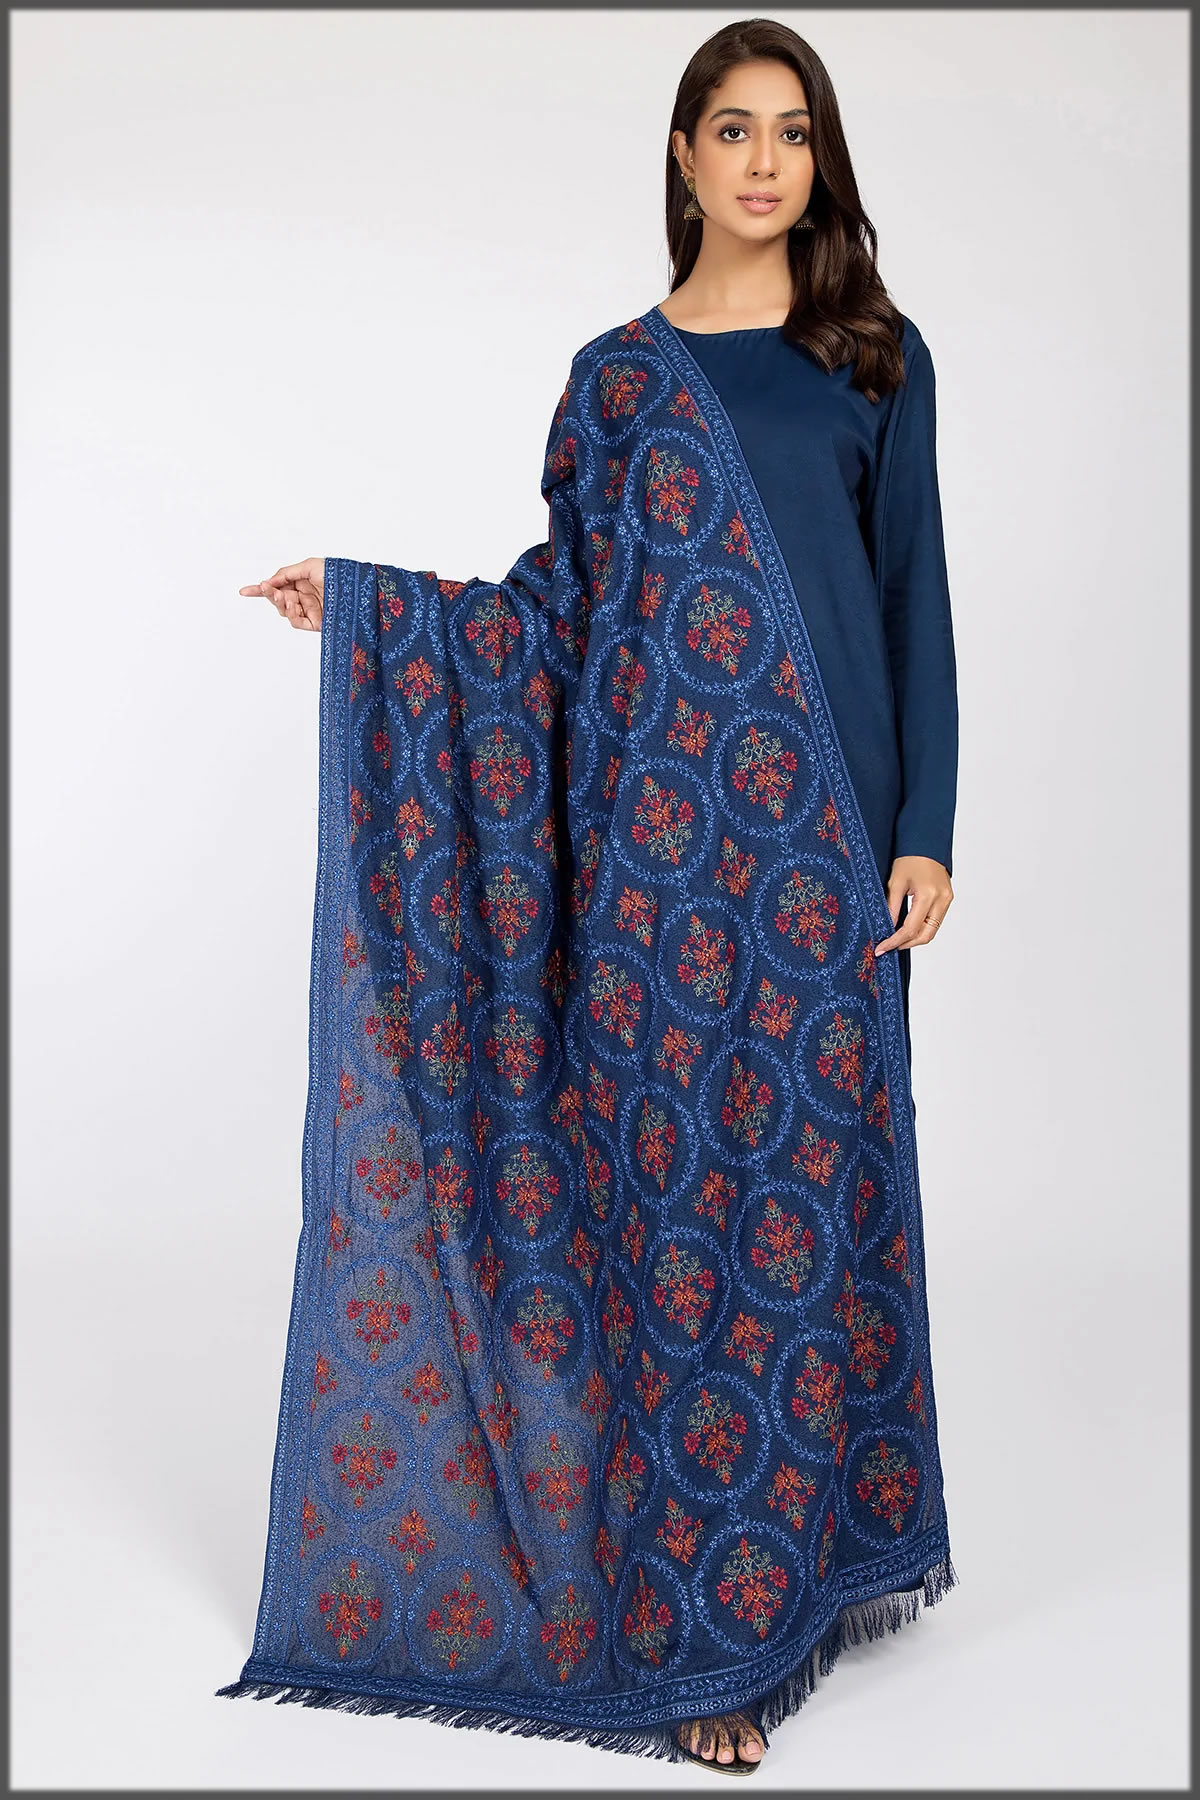 blue kayseria winter shawl collection